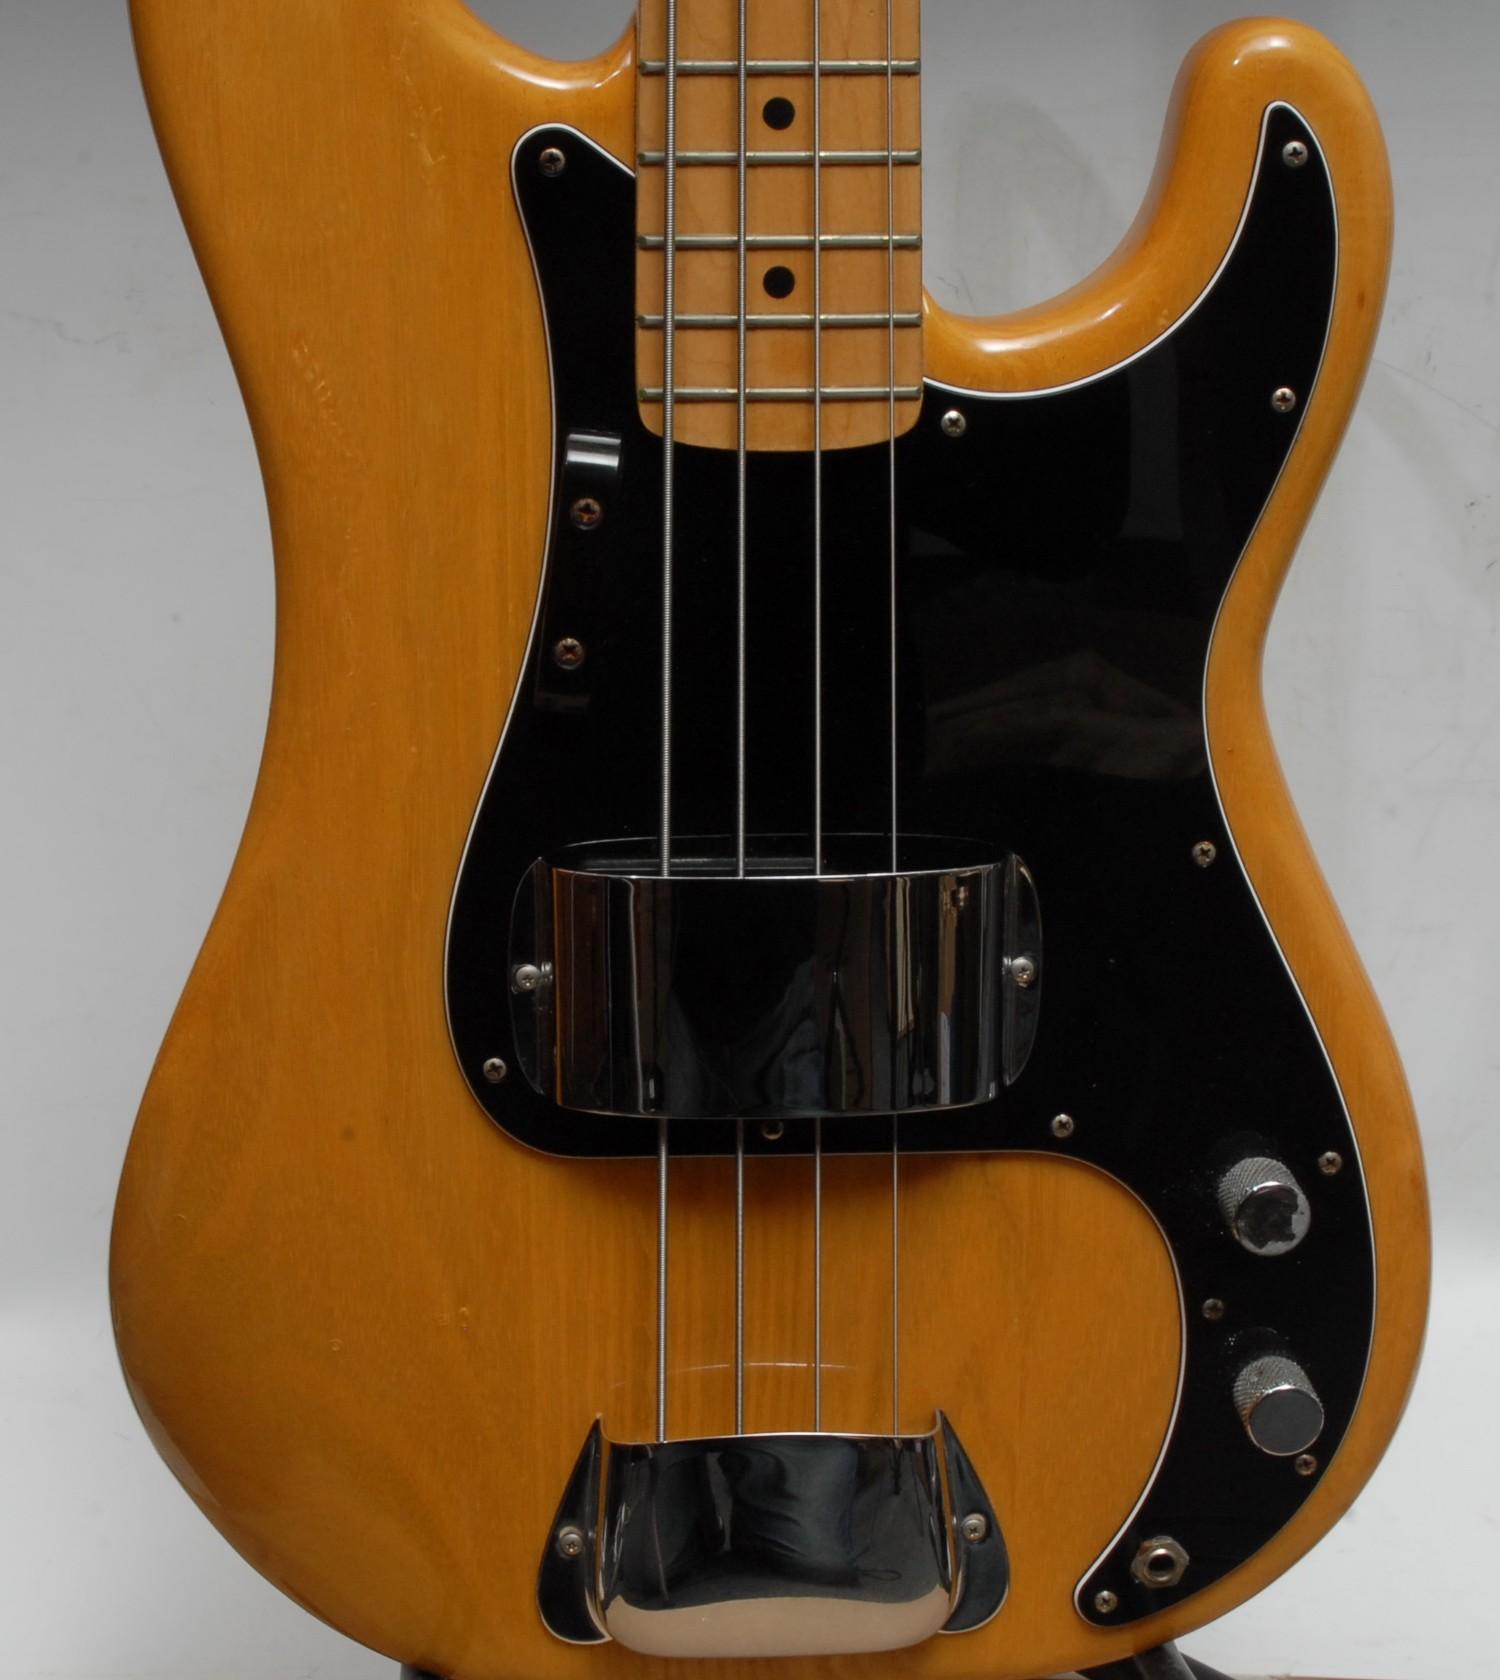 A Fender Precision electric bass guitar USA, natural wood body, maple neck, black pickguard. - Image 5 of 16